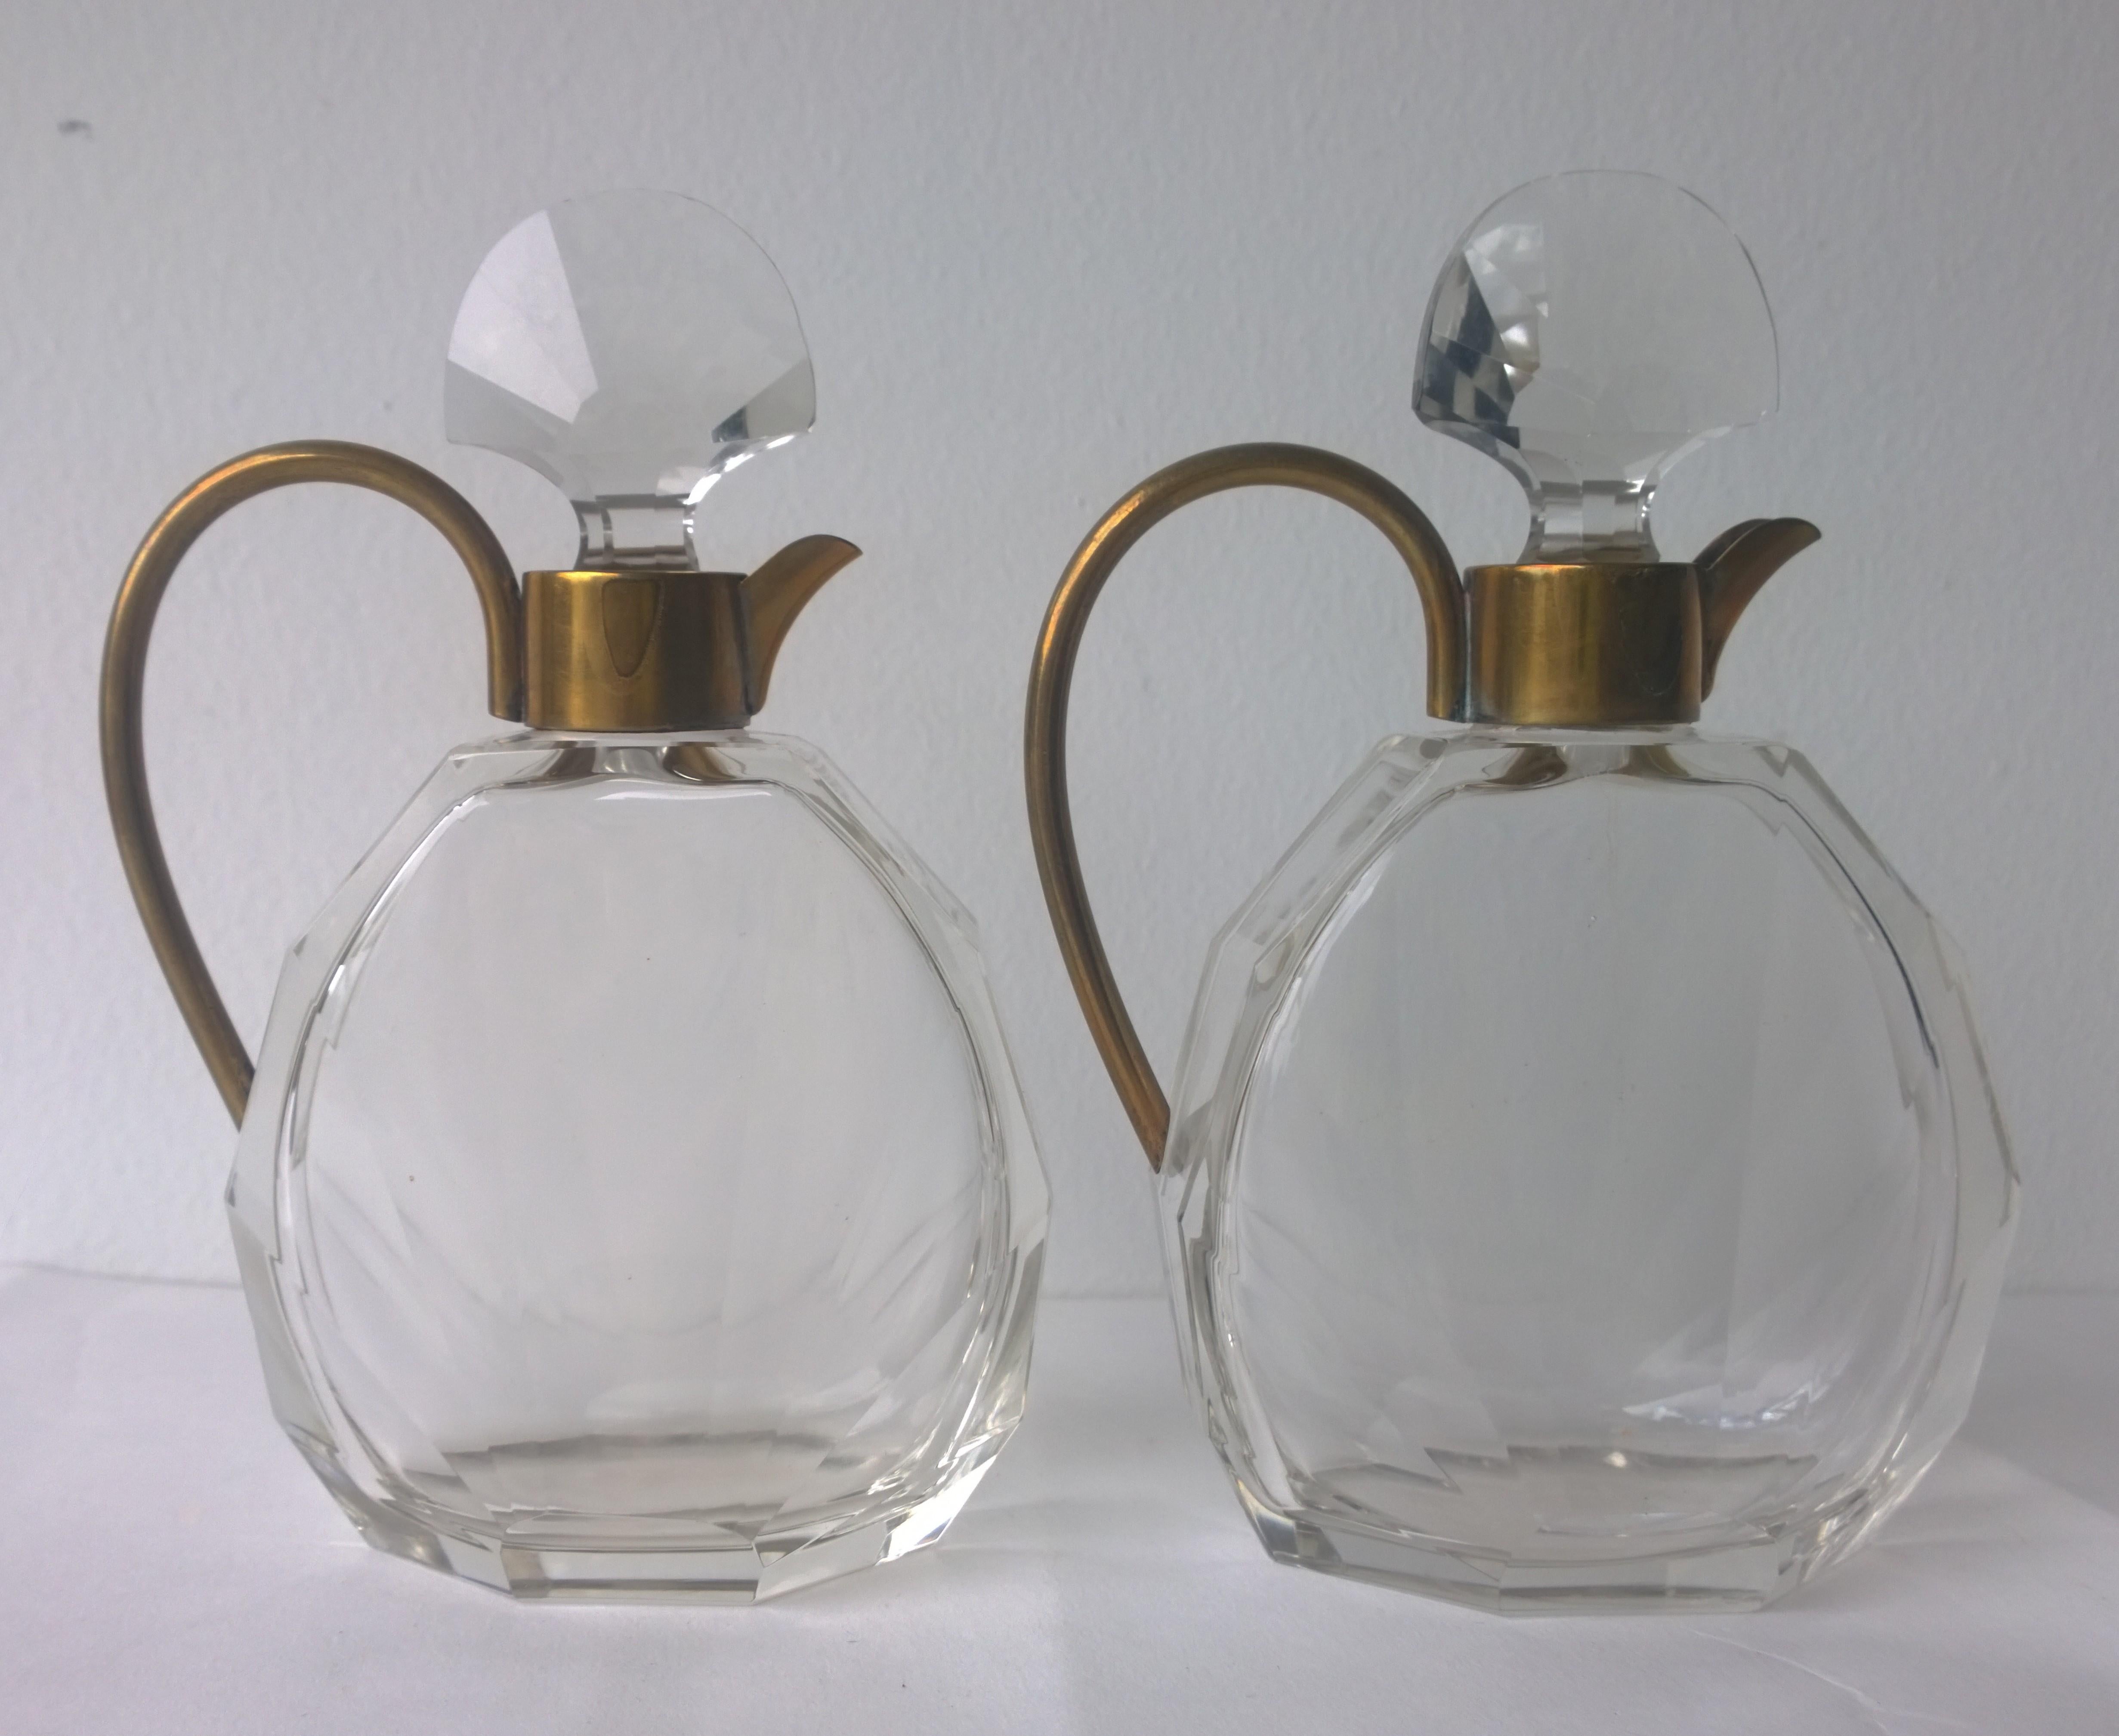 Offered is a pair of Art Deco faceted glass and brass decanters. This beautiful Art Deco designed pair is a mirror image of one another. The decanters were probably used for oil and vinegar. This pair of decanters, whatever its use, is a little gem